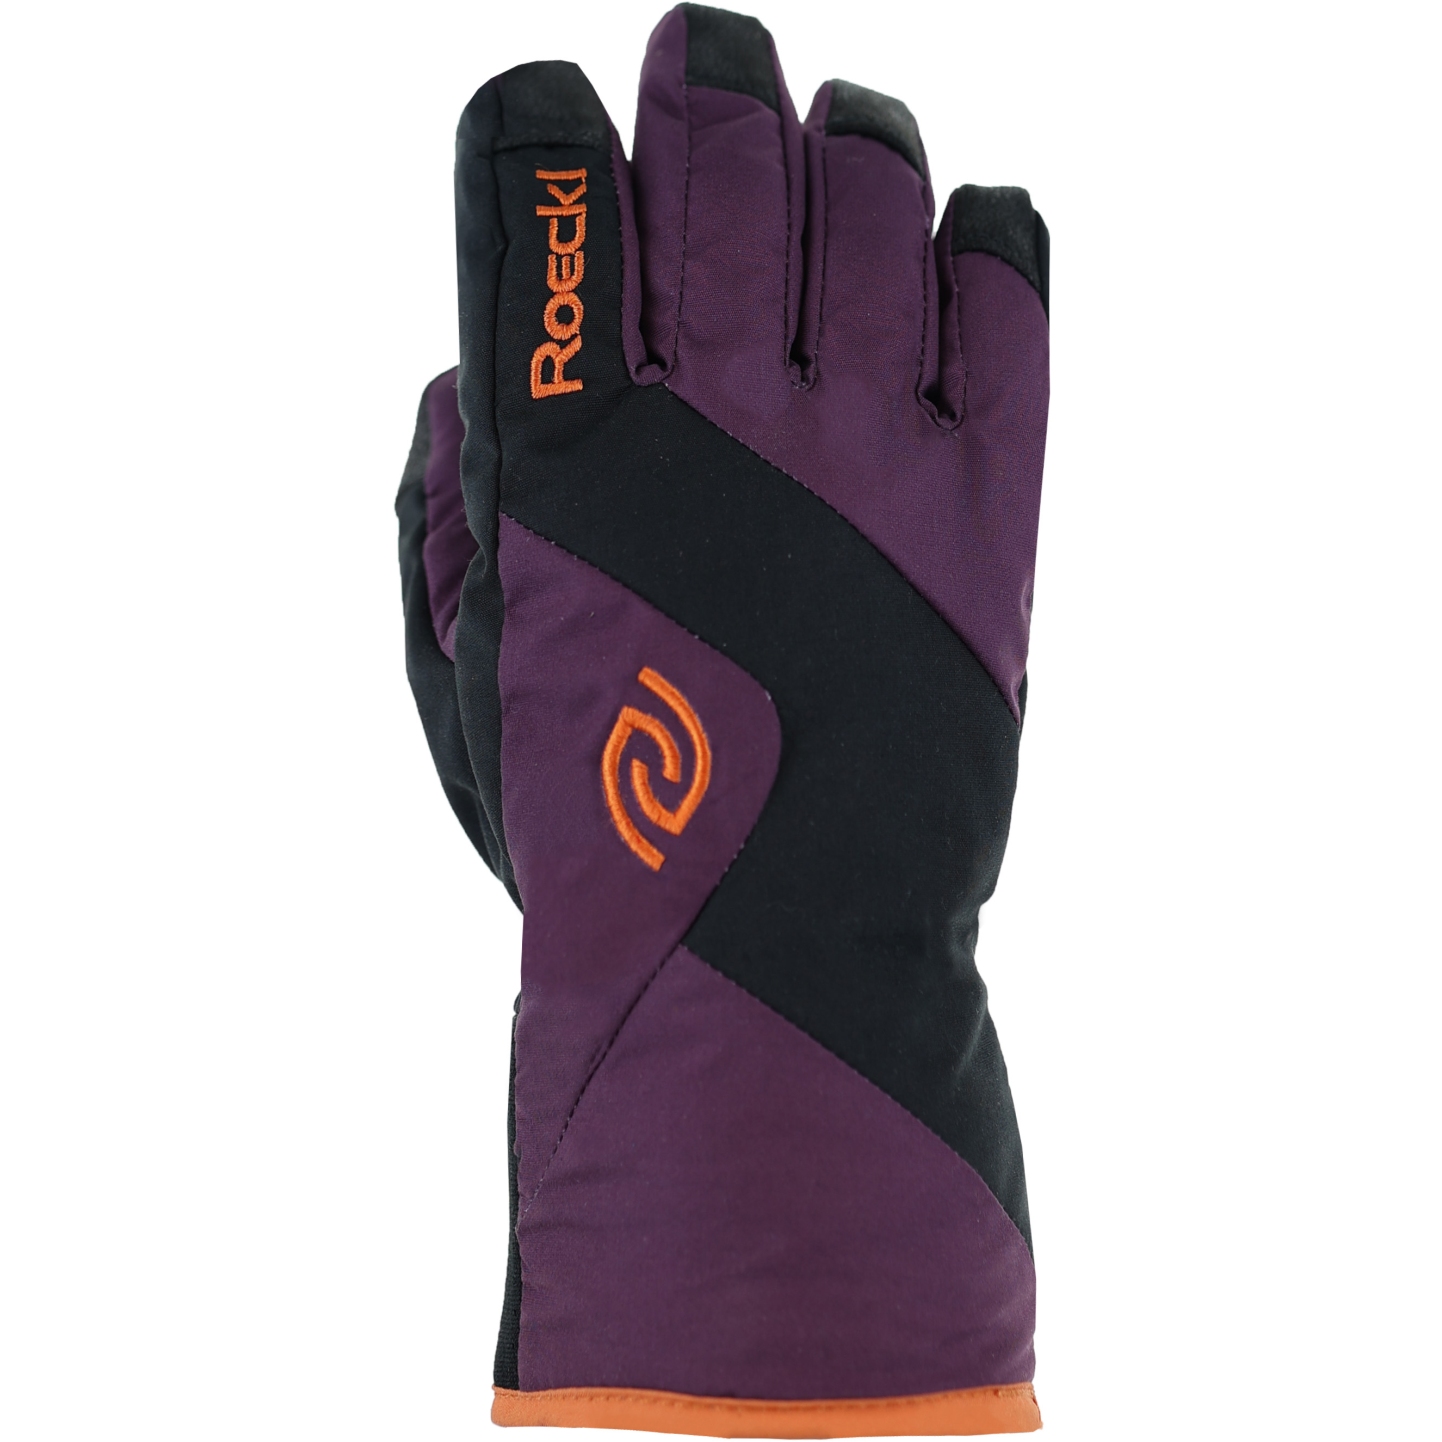 Picture of Roeckl Sports Axams GTX Winter Gloves Kids - grape wine 4985